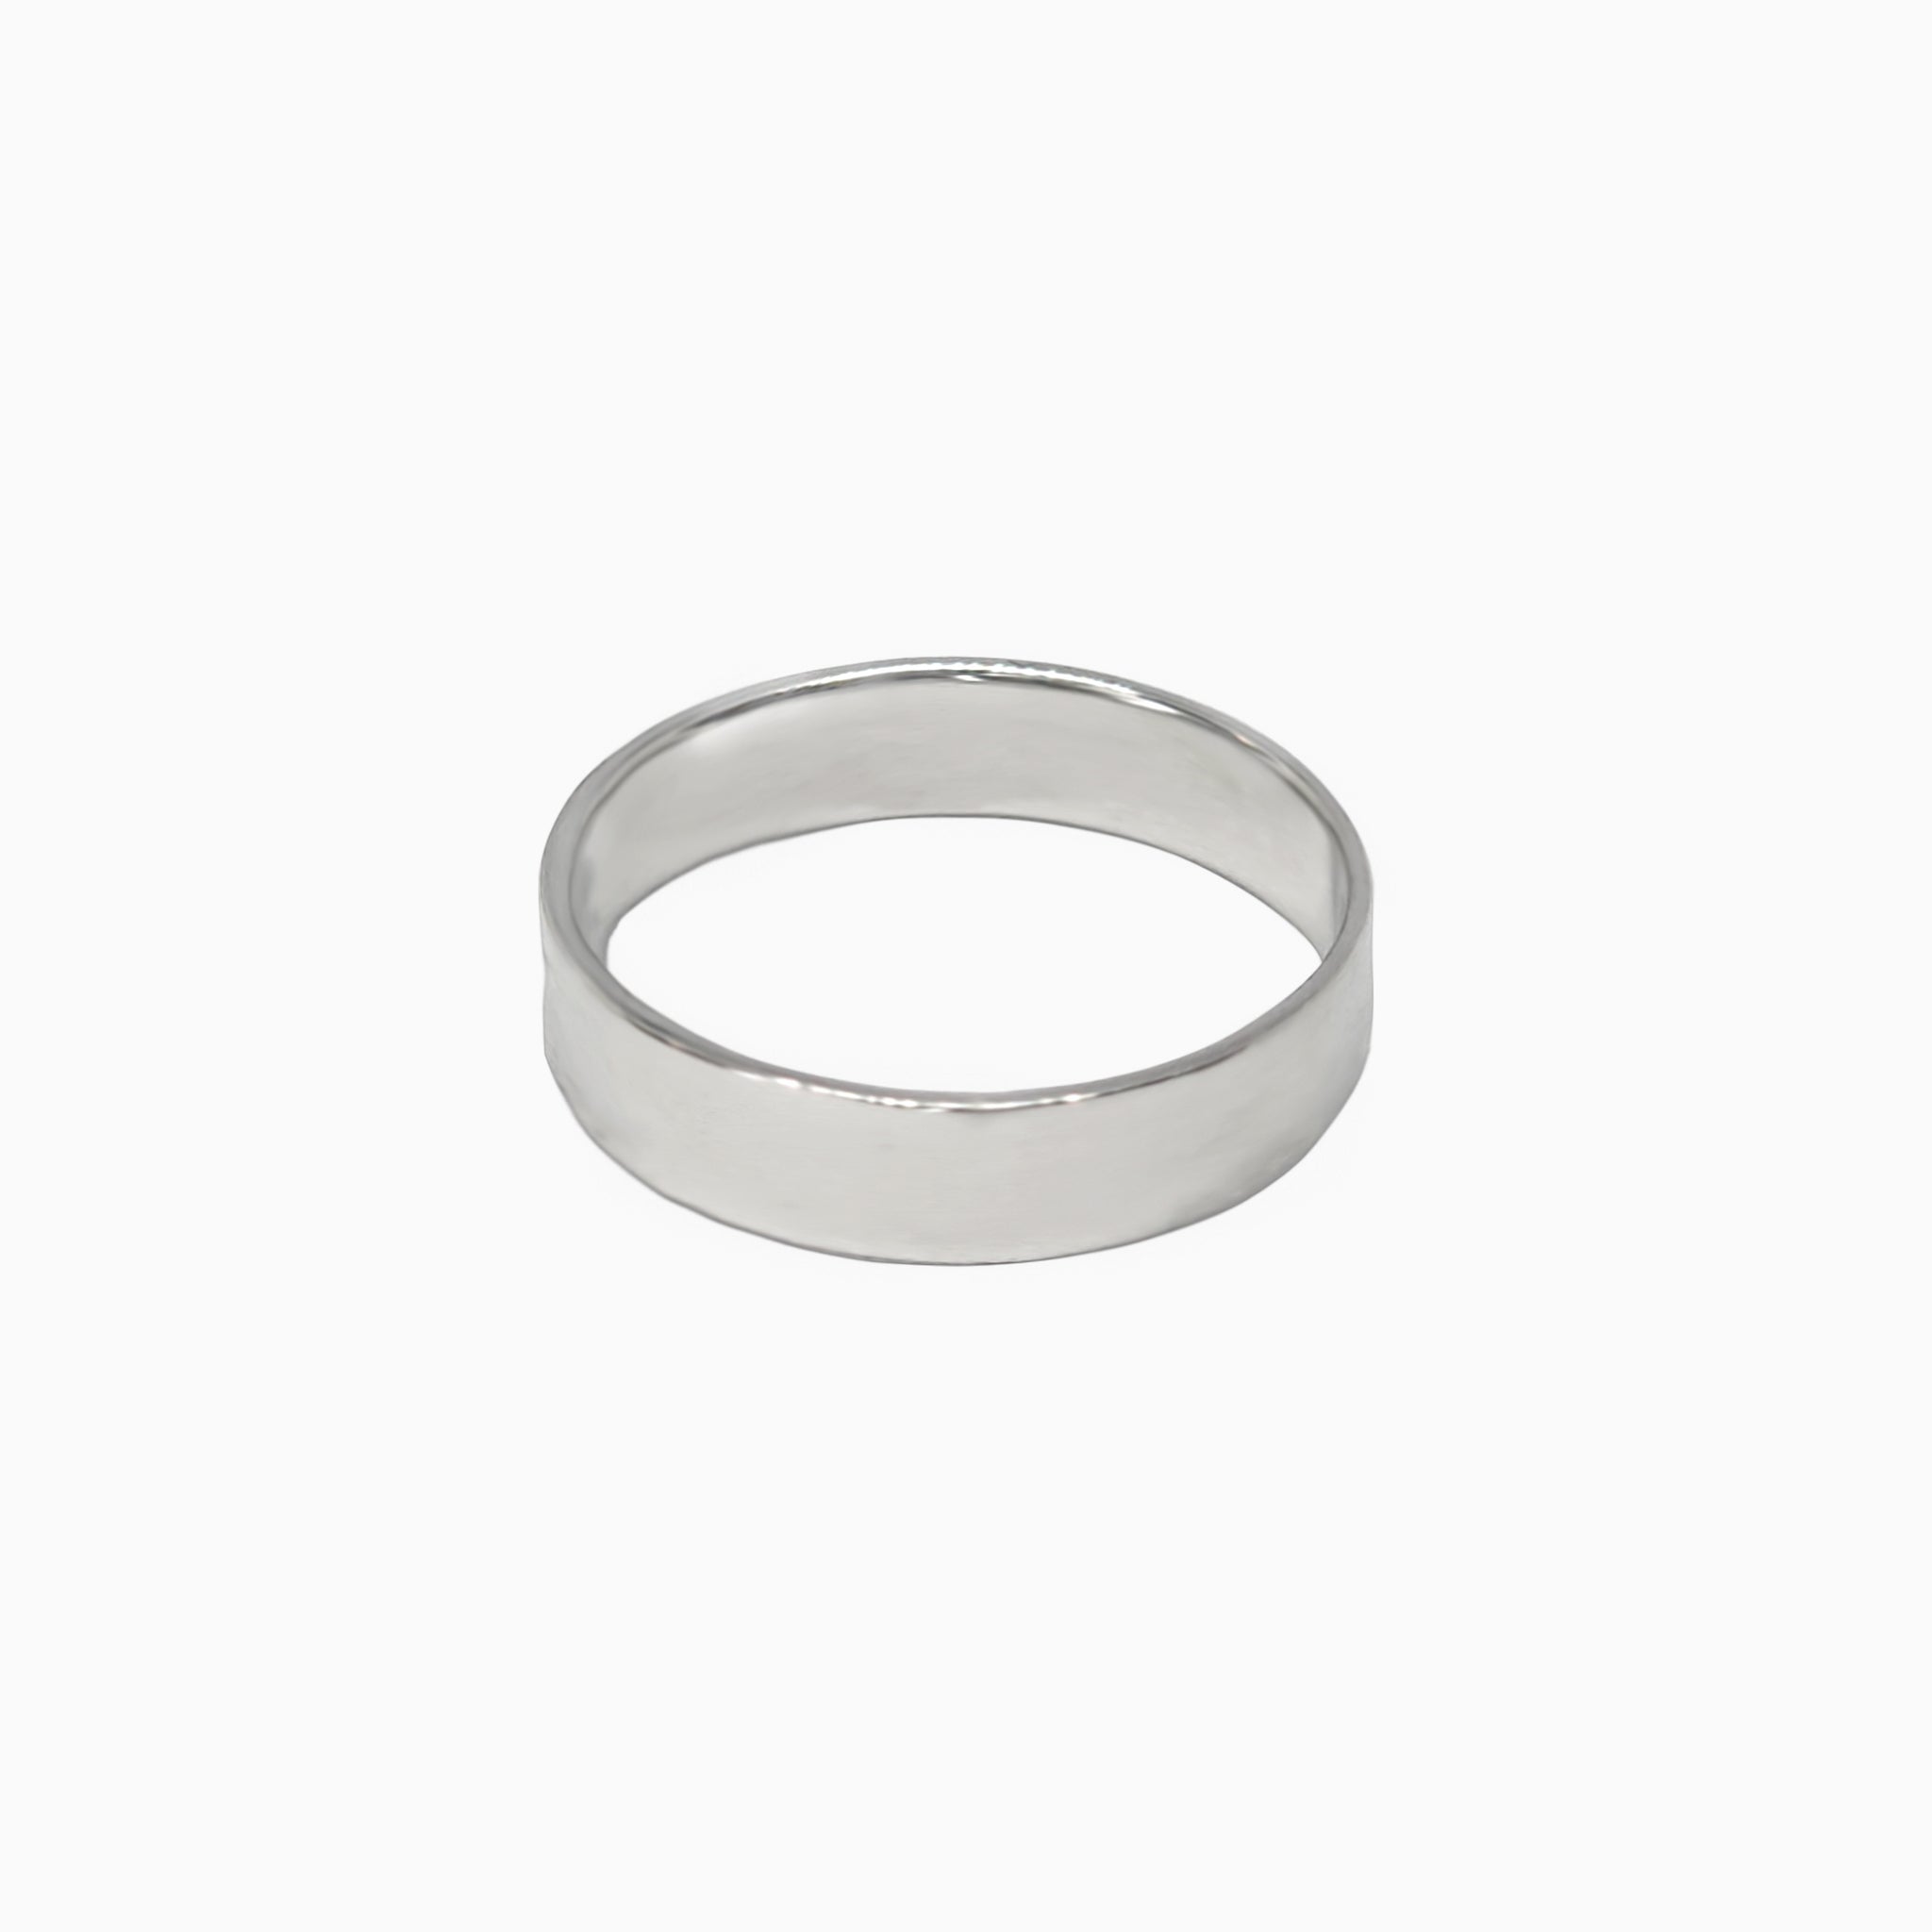 Silver 5mm Unisex Band Ring